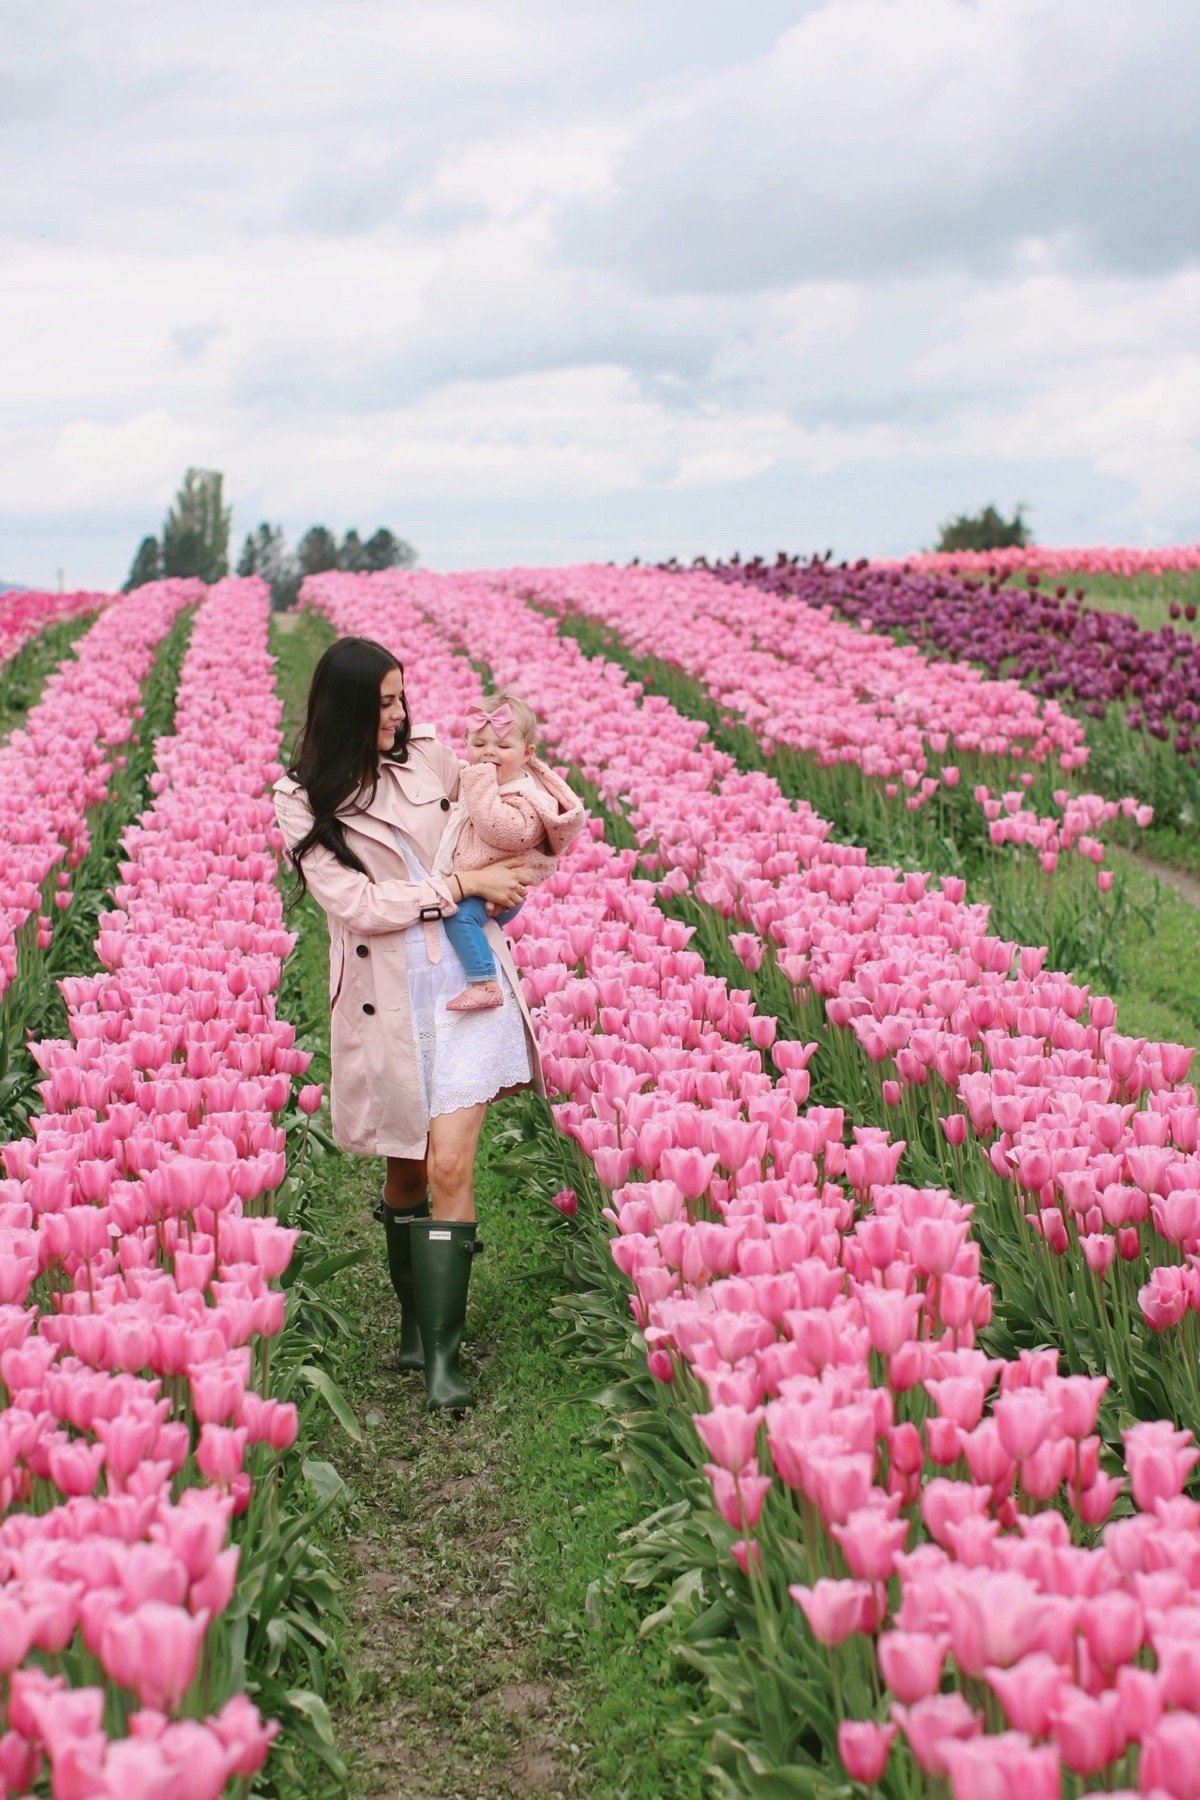 REMINISCING ON OUR TULIP FESTIVAL ROAD TRIP...